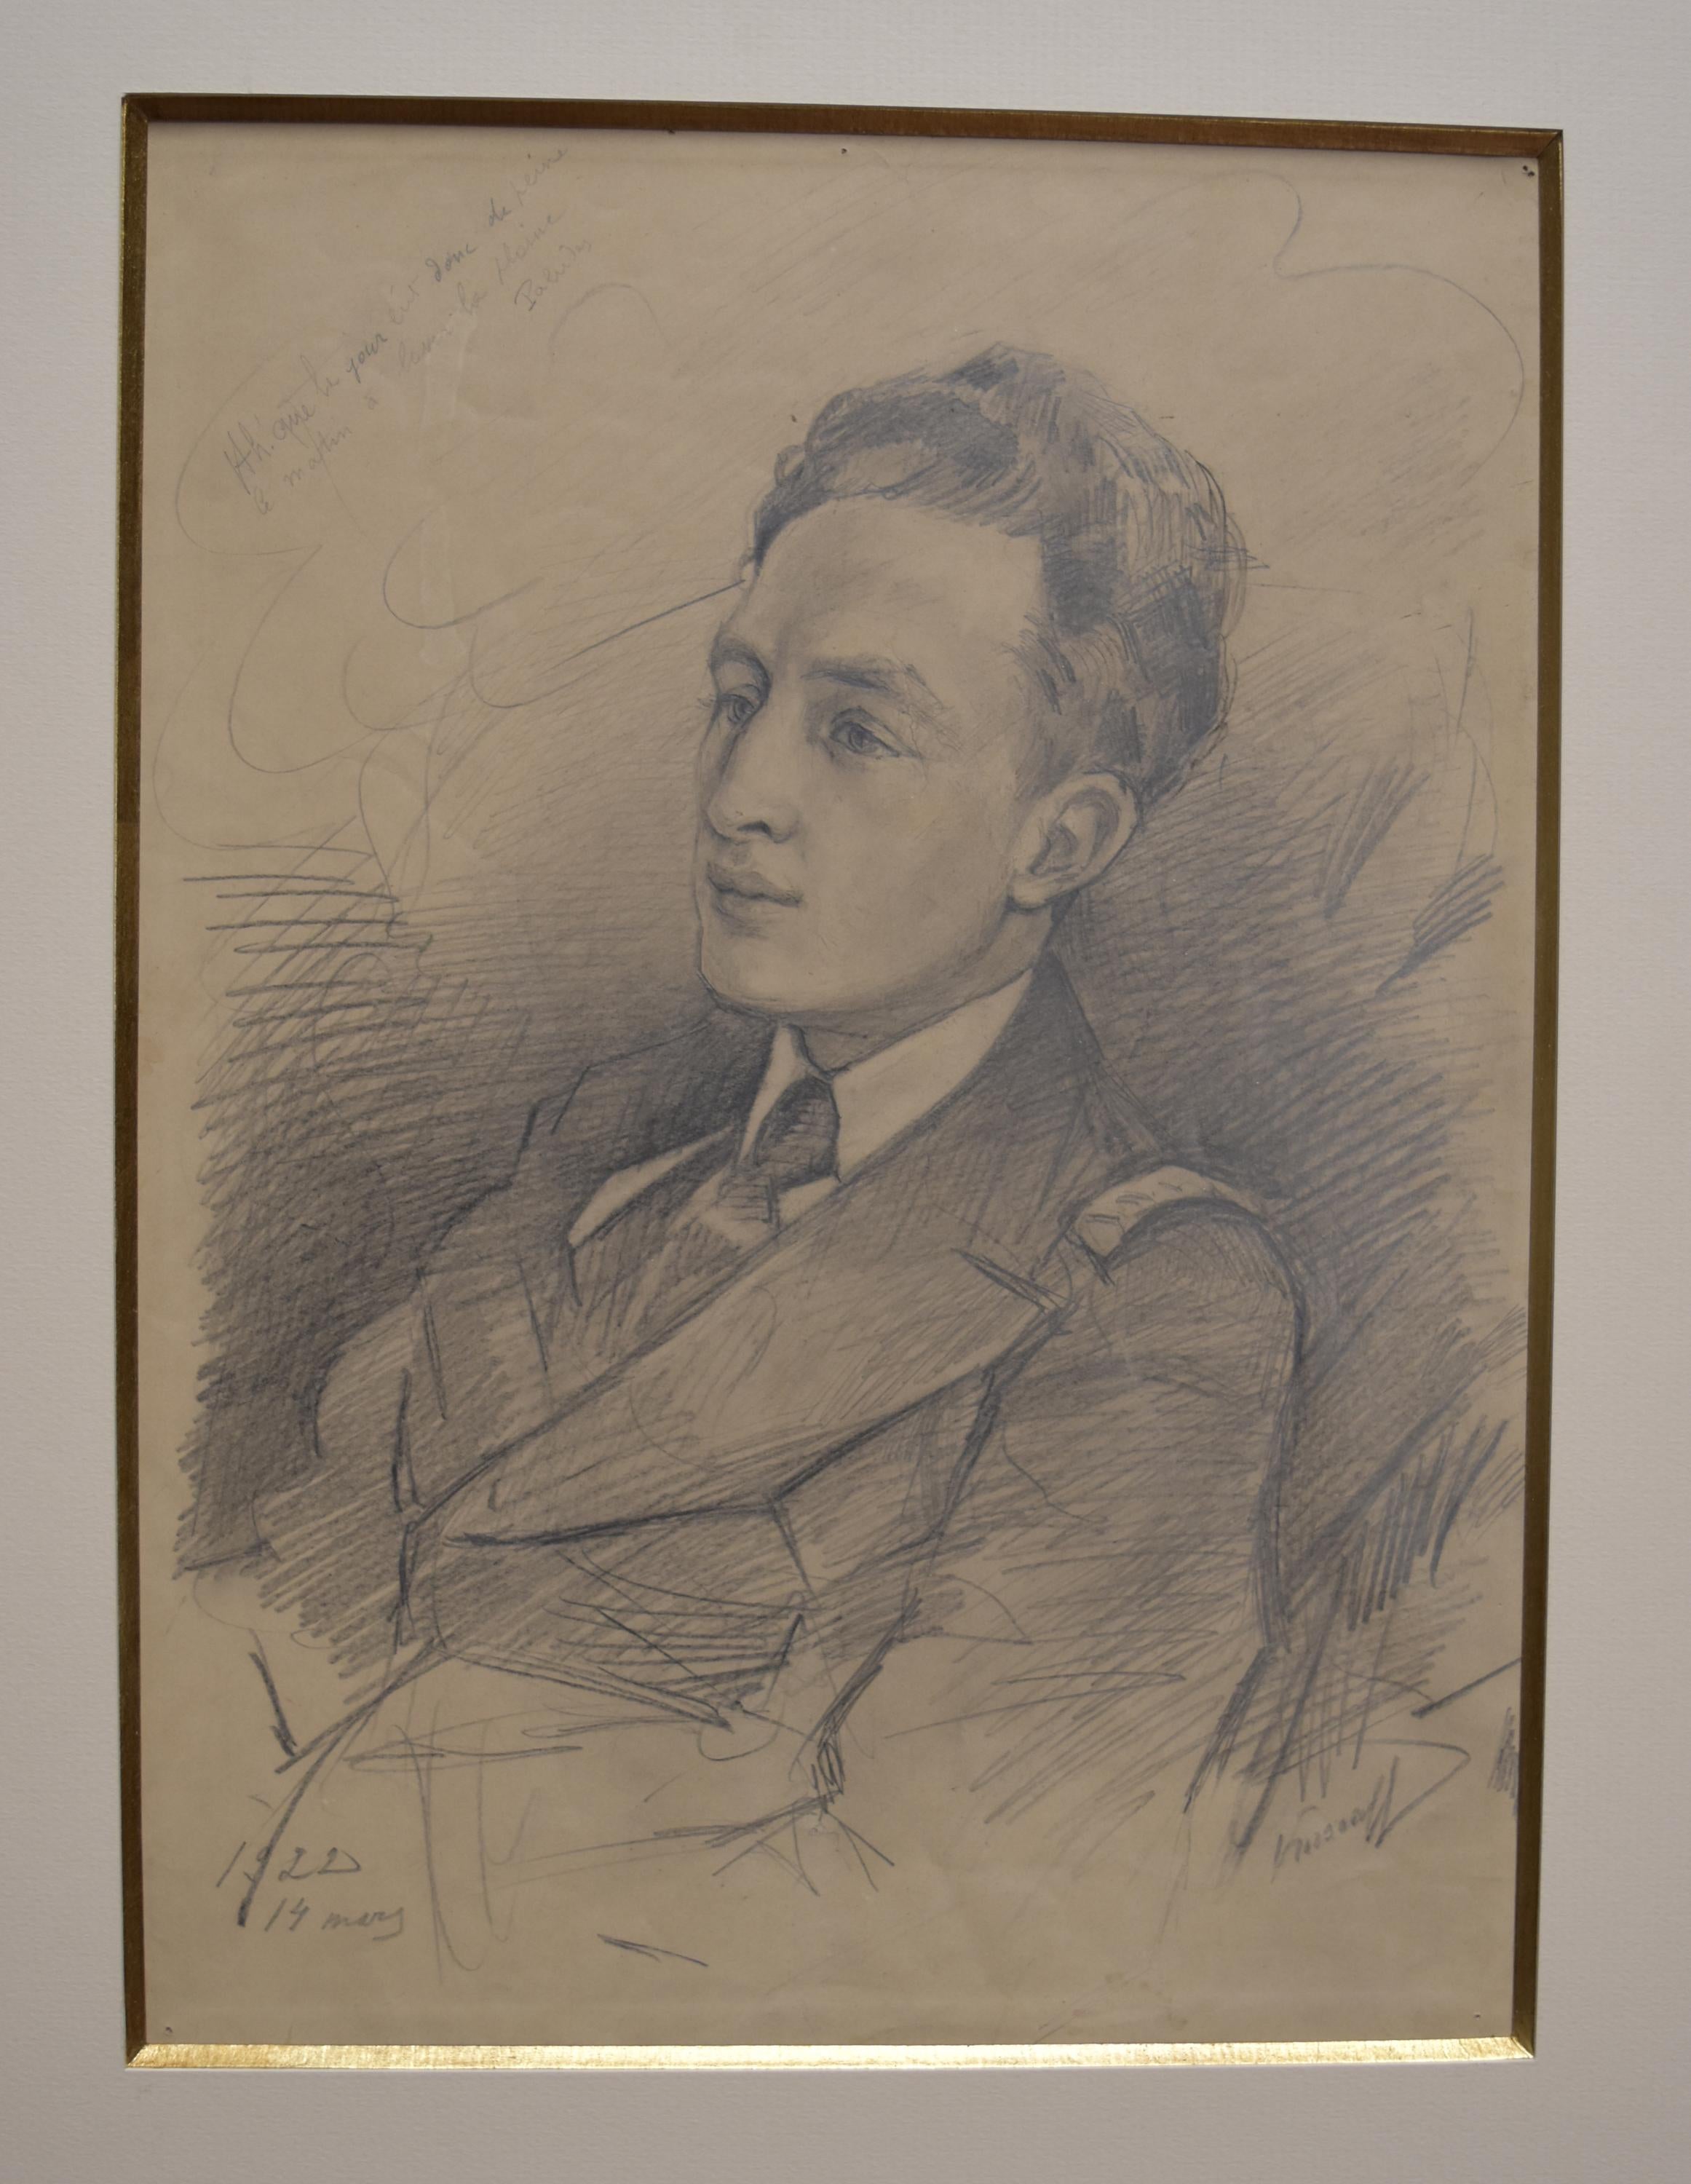 French School beginning of 20th Century
Portrait of a young man,  March 1922
Lead mine on paper (a piece of nautical chart, see photo of the reverse) 
Dated 